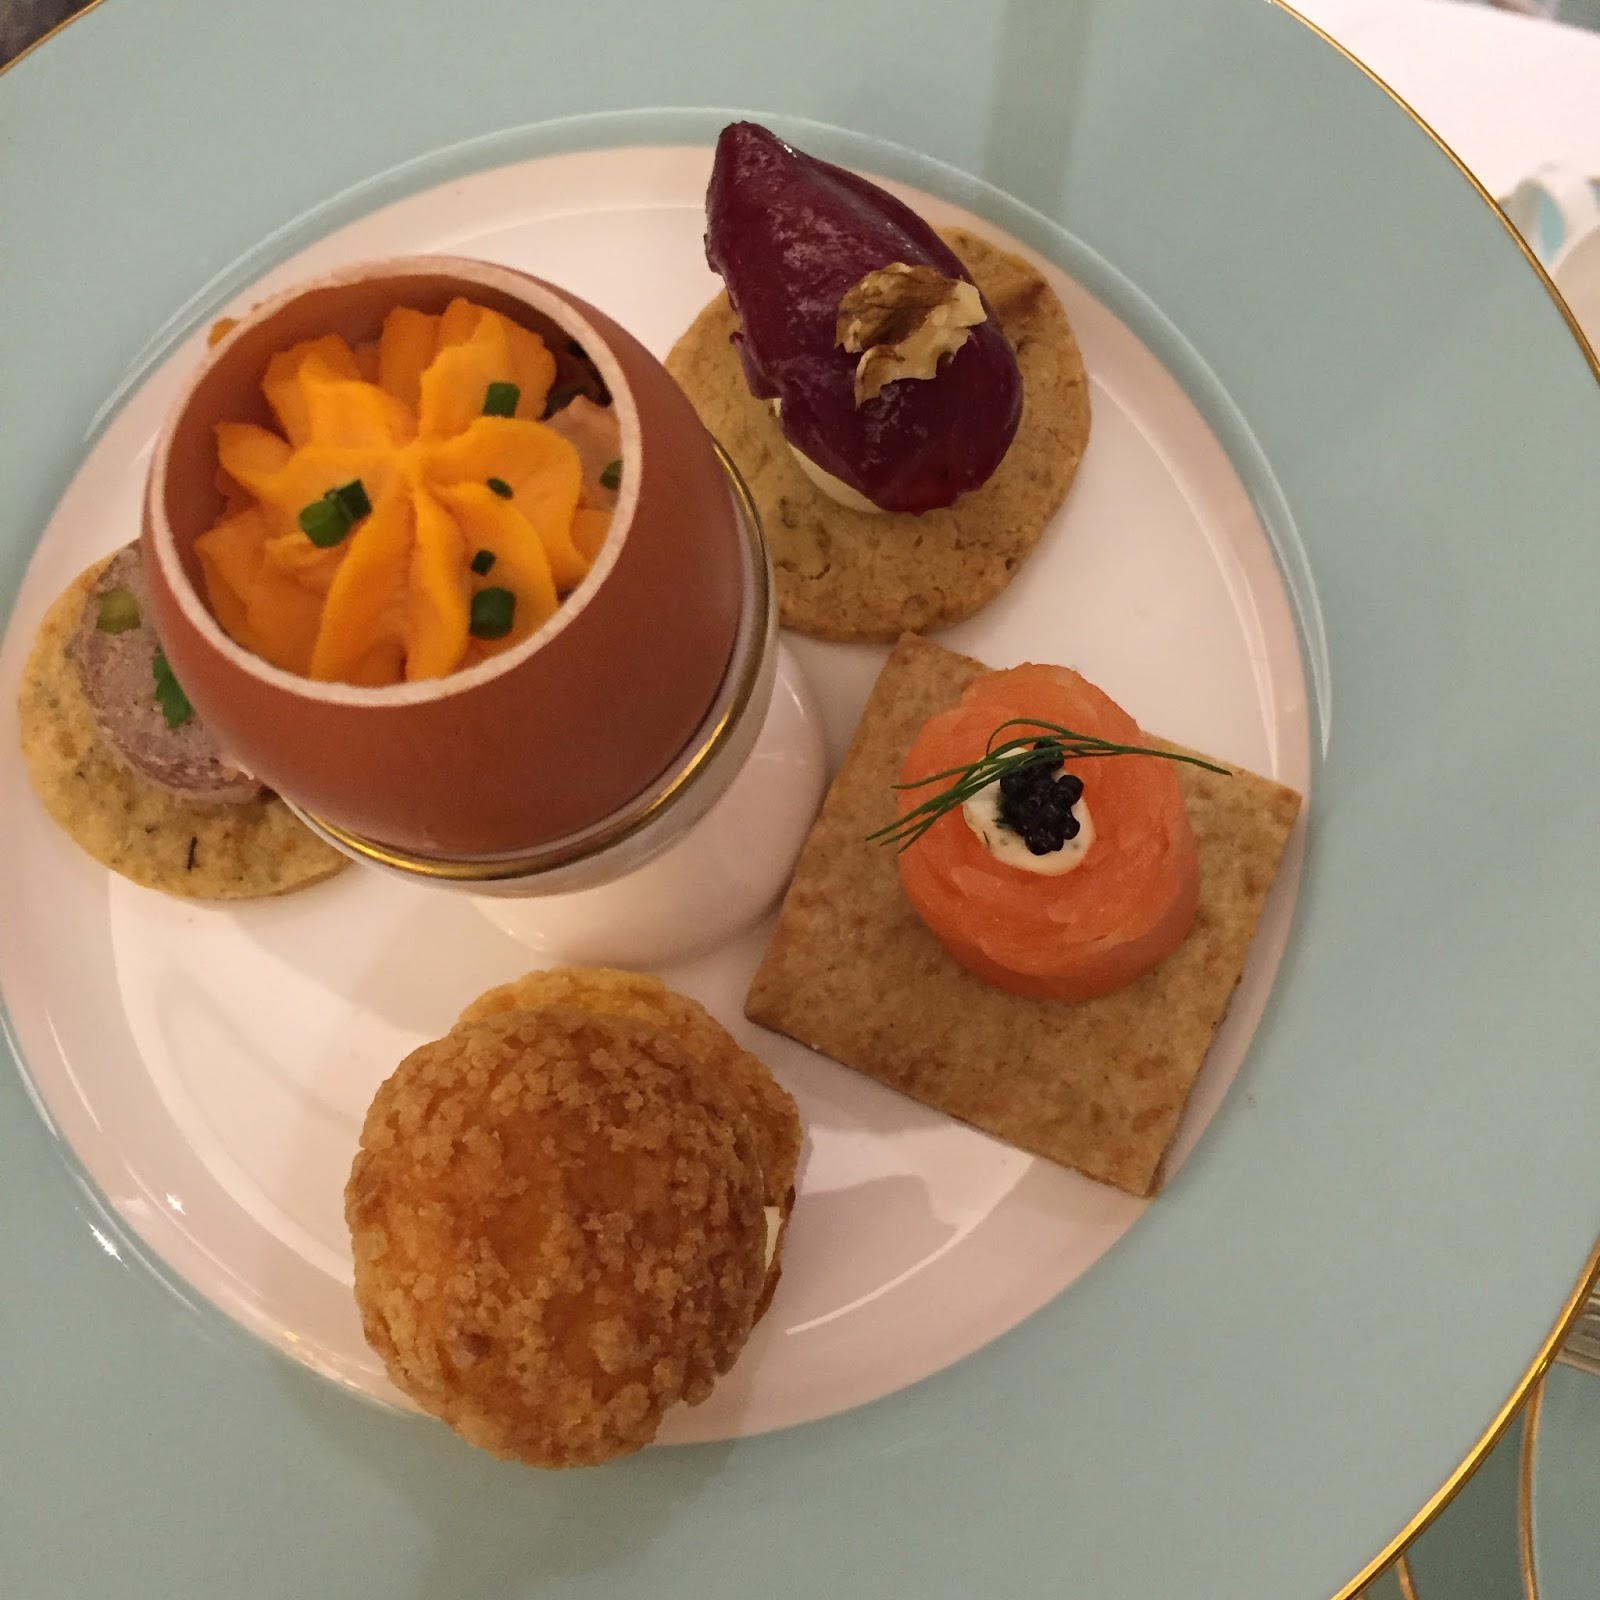 London - Afternoon Tea at Fortnum and Mason, photo by modernbricabrac